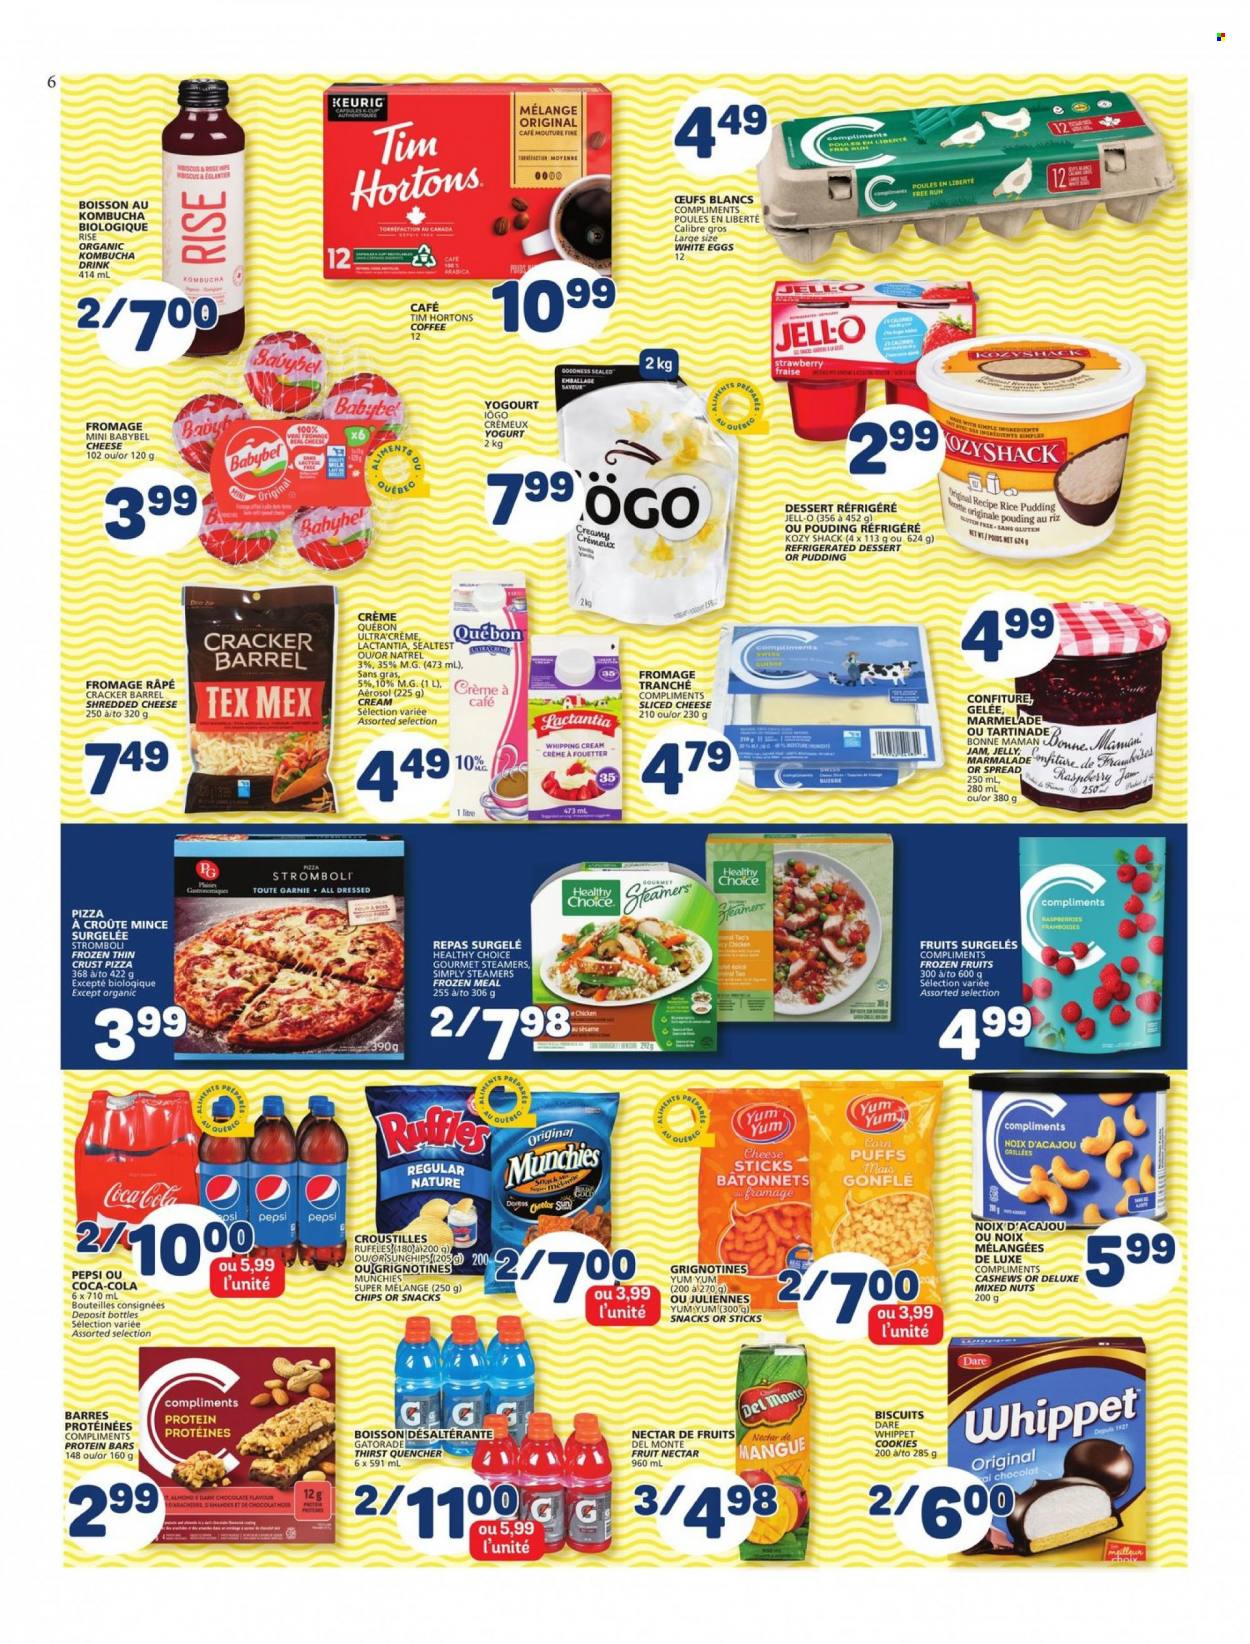 thumbnail - Marché Bonichoix Flyer - May 12, 2022 - May 18, 2022 - Sales products - puffs, corn, pizza, Healthy Choice, shredded cheese, sliced cheese, Babybel, yoghurt, rice pudding, milk, eggs, whipping cream, cheese sticks, cookies, chocolate, jelly, crackers, biscuit, Ruffles, Jell-O, protein bar, fruit jam, cashews, mixed nuts, Coca-Cola, Pepsi, fruit nectar, Gatorade, kombucha, coffee, coffee capsules, K-Cups, Keurig, wine, rosé wine. Page 6.